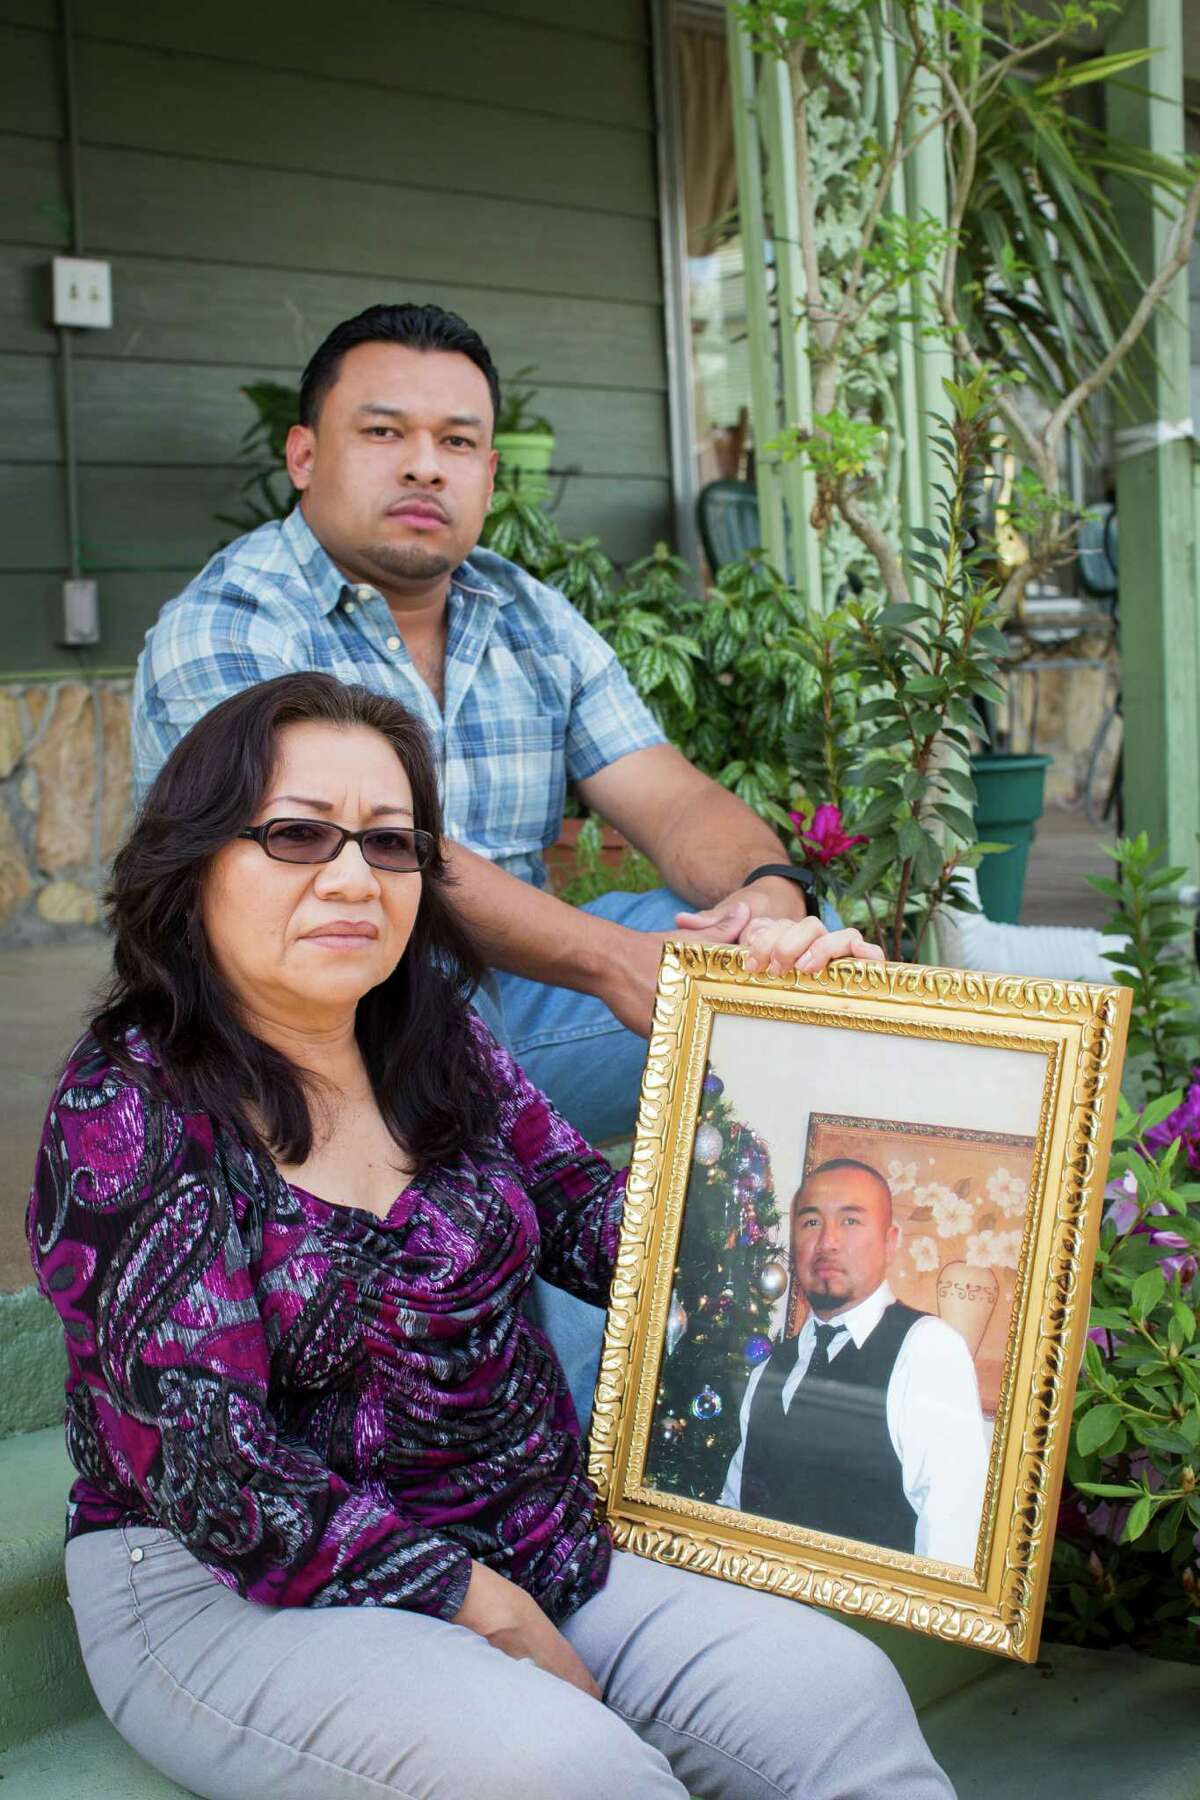 Rolando Ventura and his mother, Cristina Martinez, display a portrait of Rolando's brother Omar, who was unarmed when he was shot to death by an off-duty Houston police officer five years ago. The family believes the shooting was unjustified.